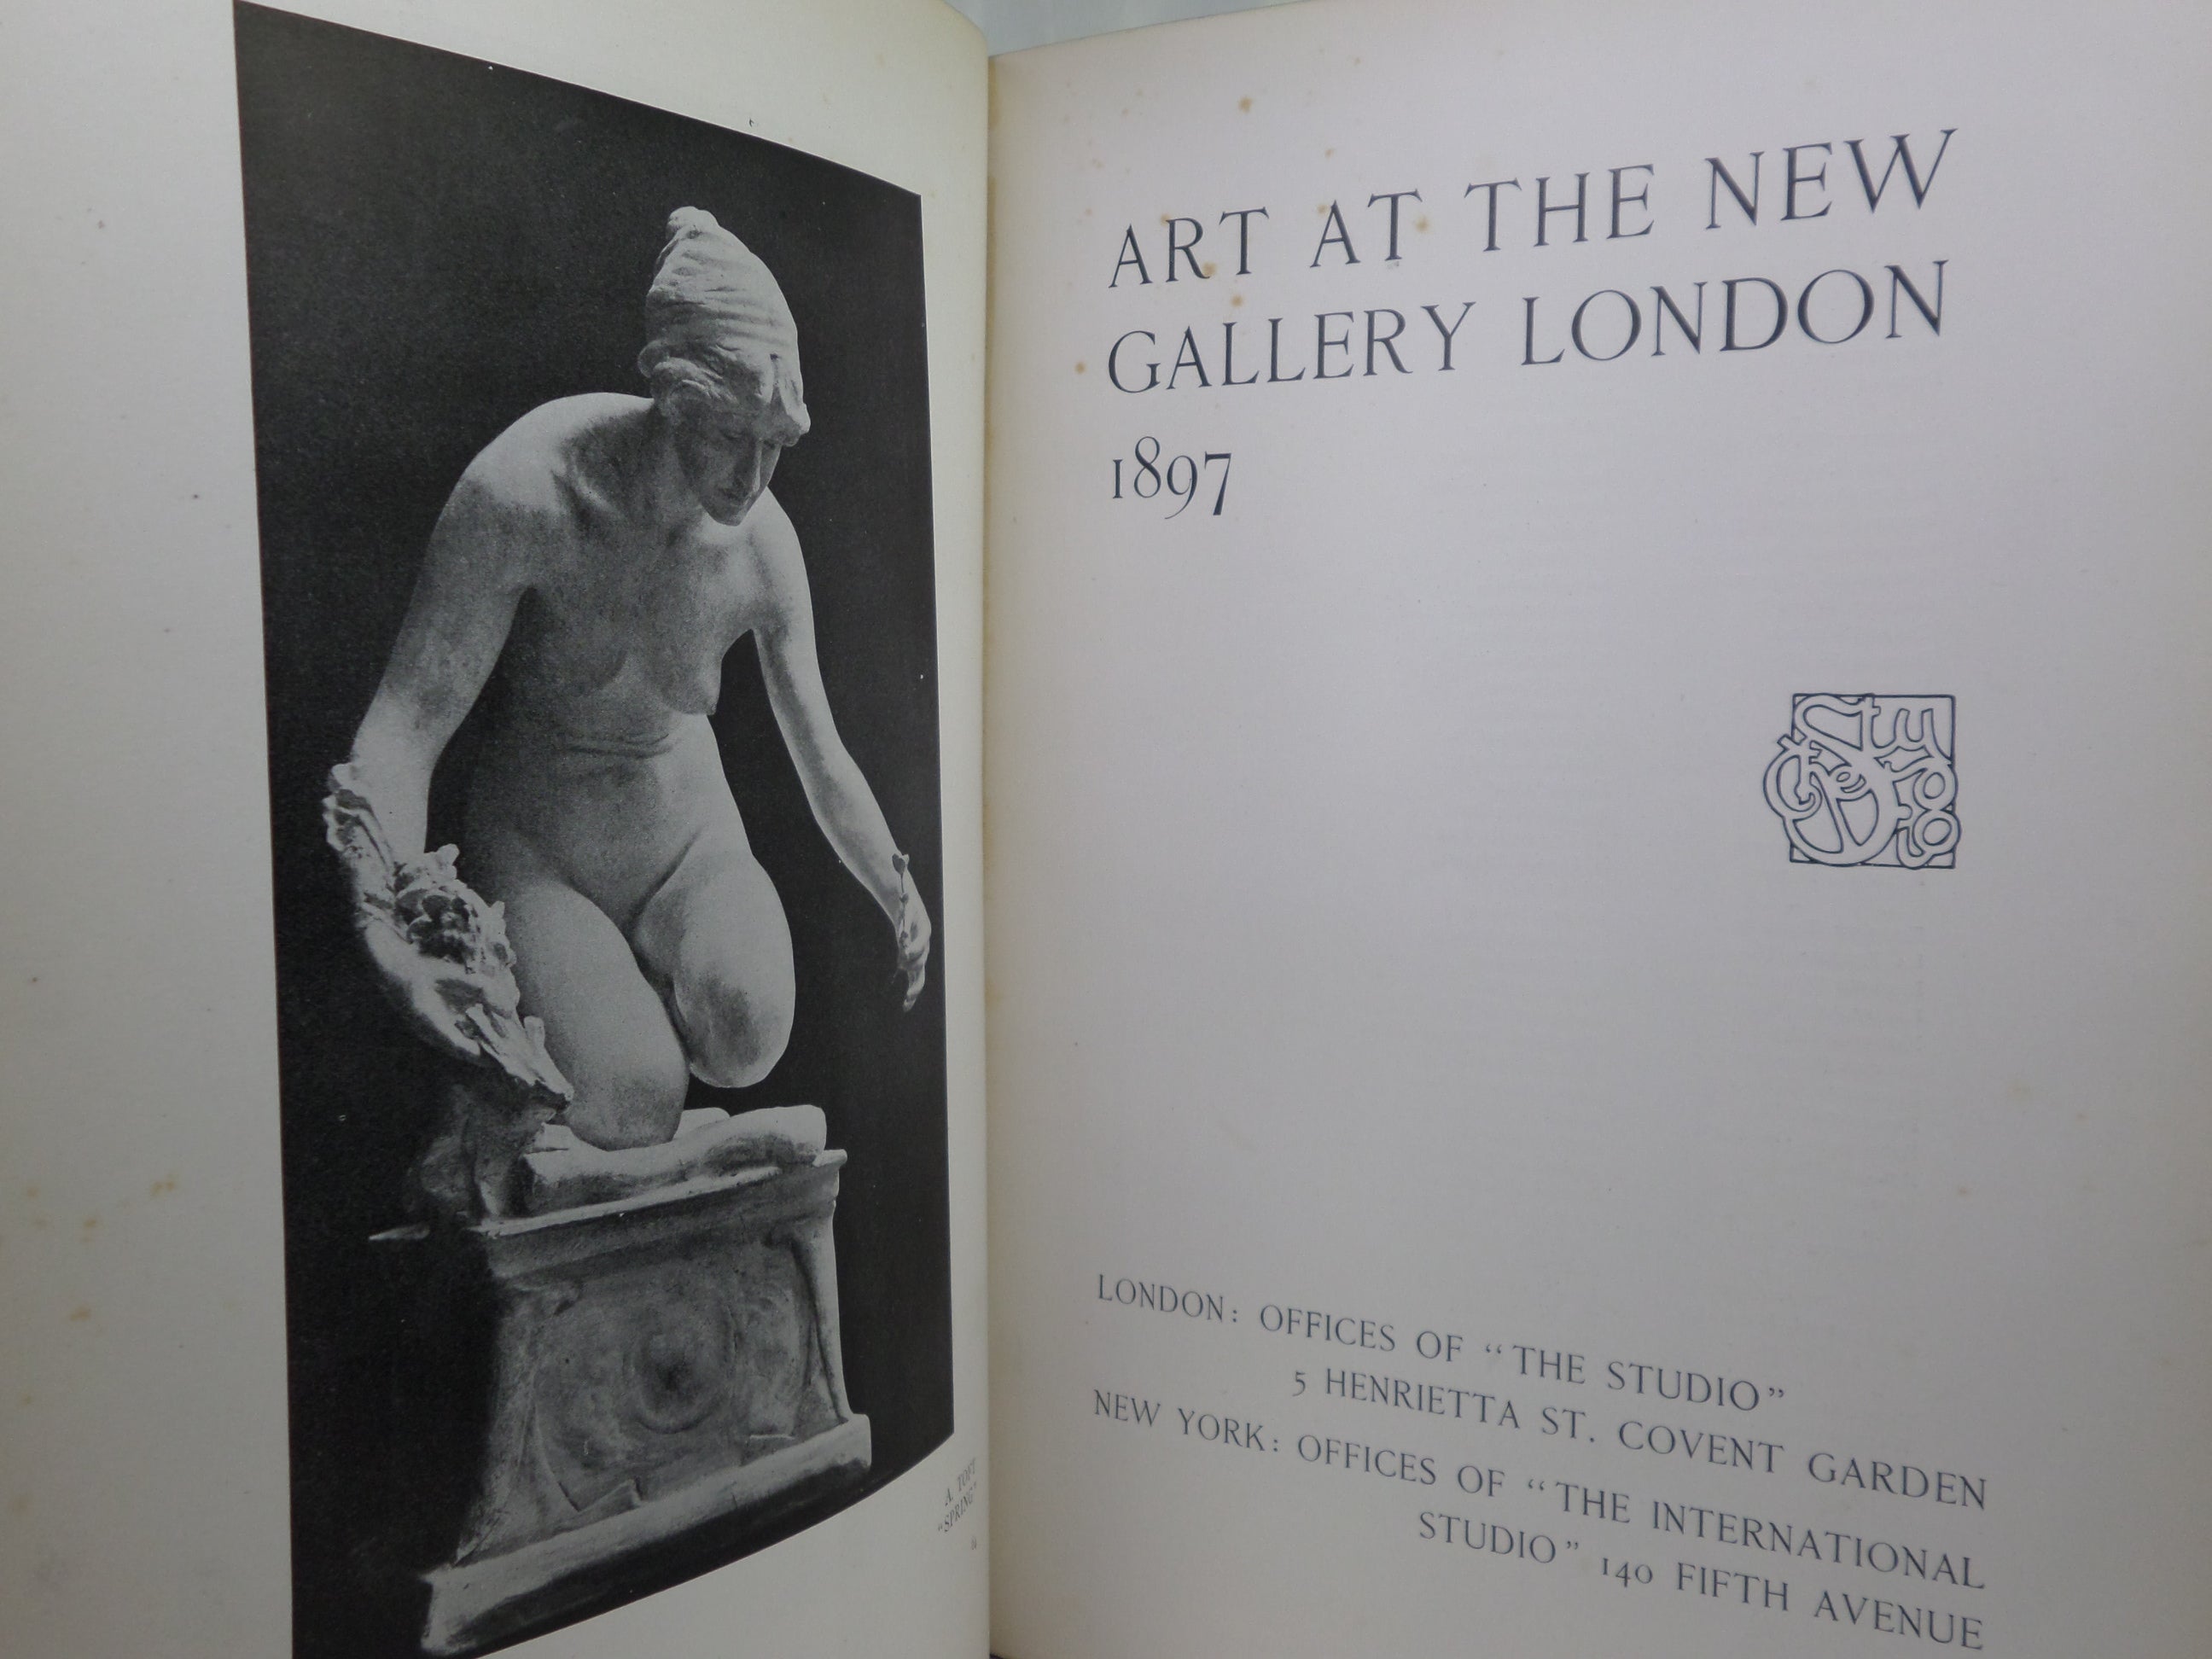 THE ART OF 1897 - ROYAL ACADEMY - NEW GALLERY - NEW ENGLISH ART CLUB ETC.